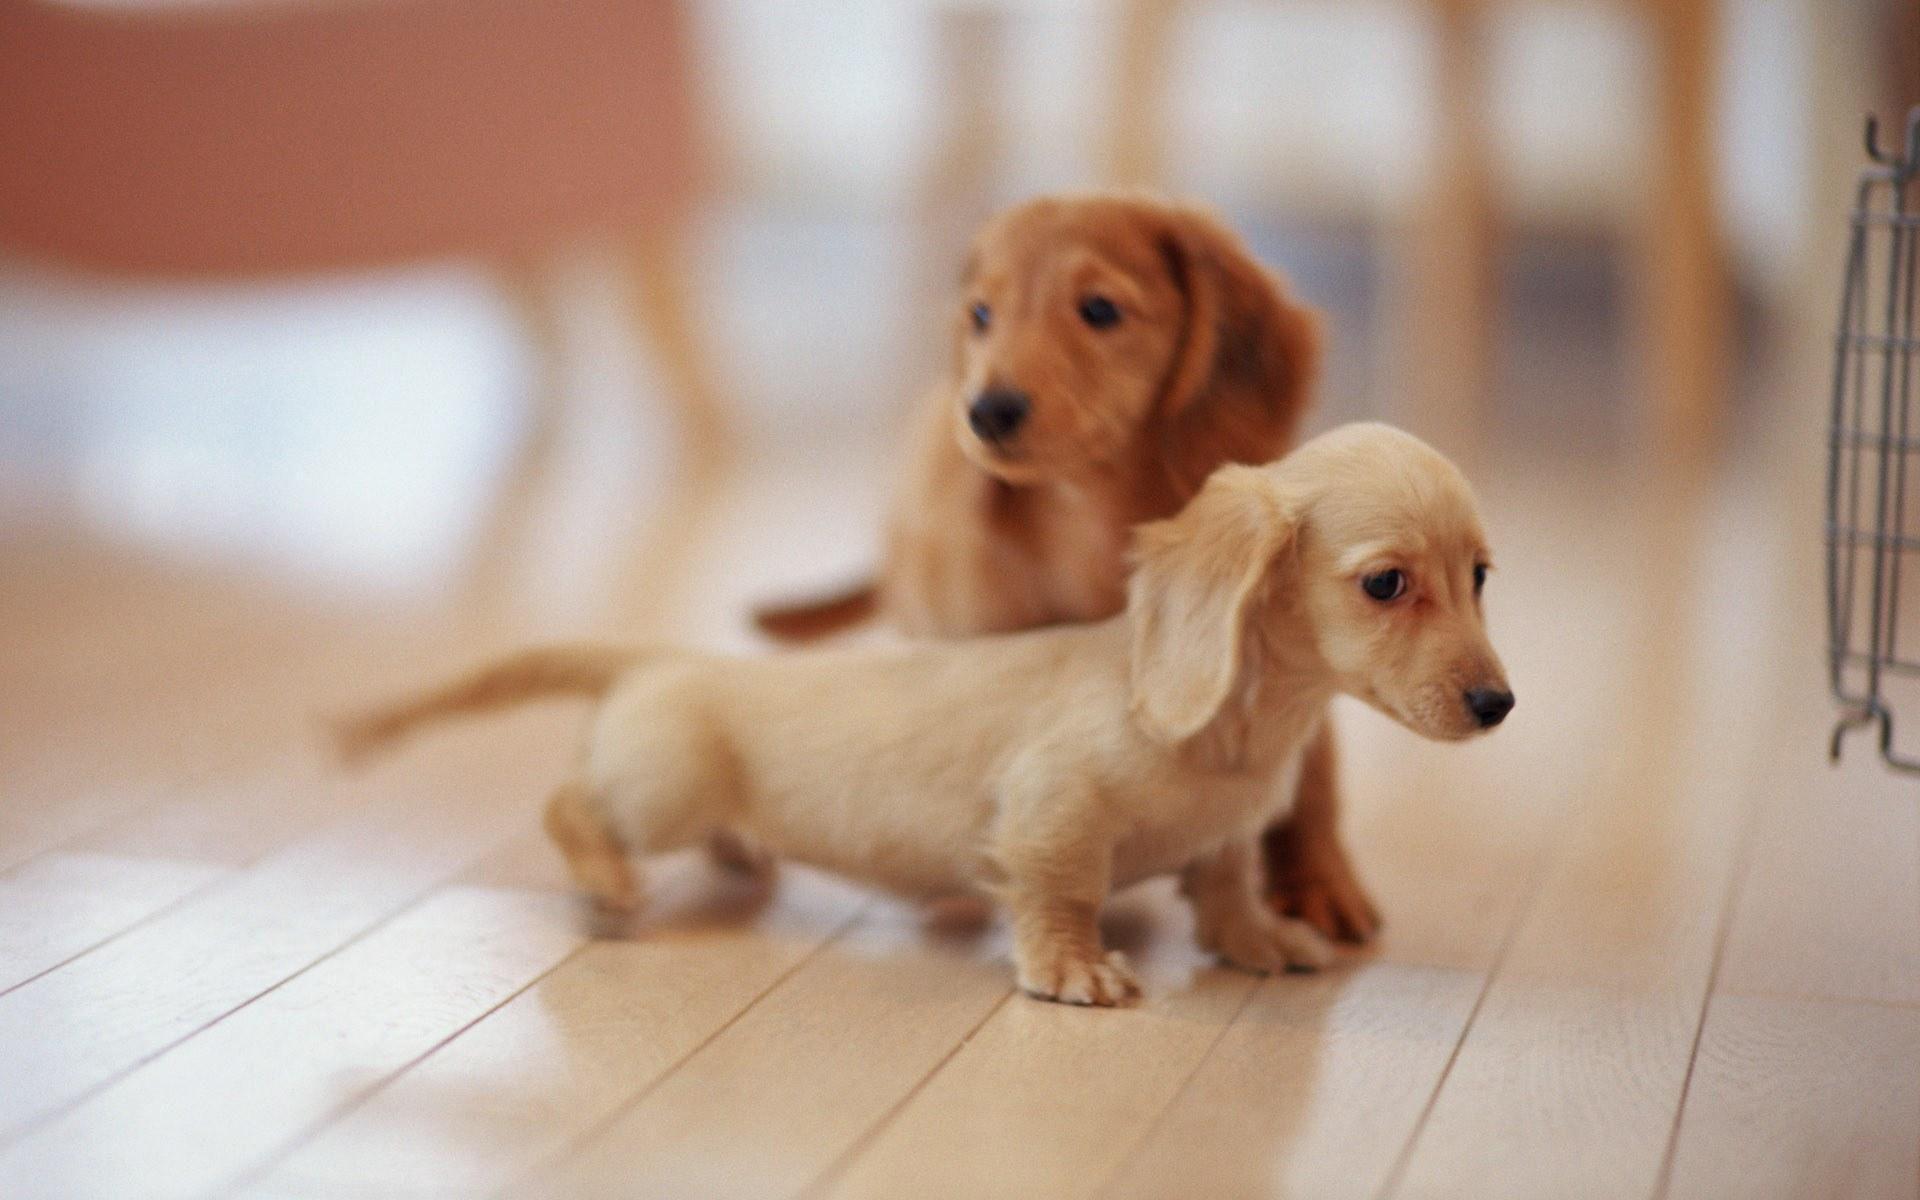 Cute Puppies Background